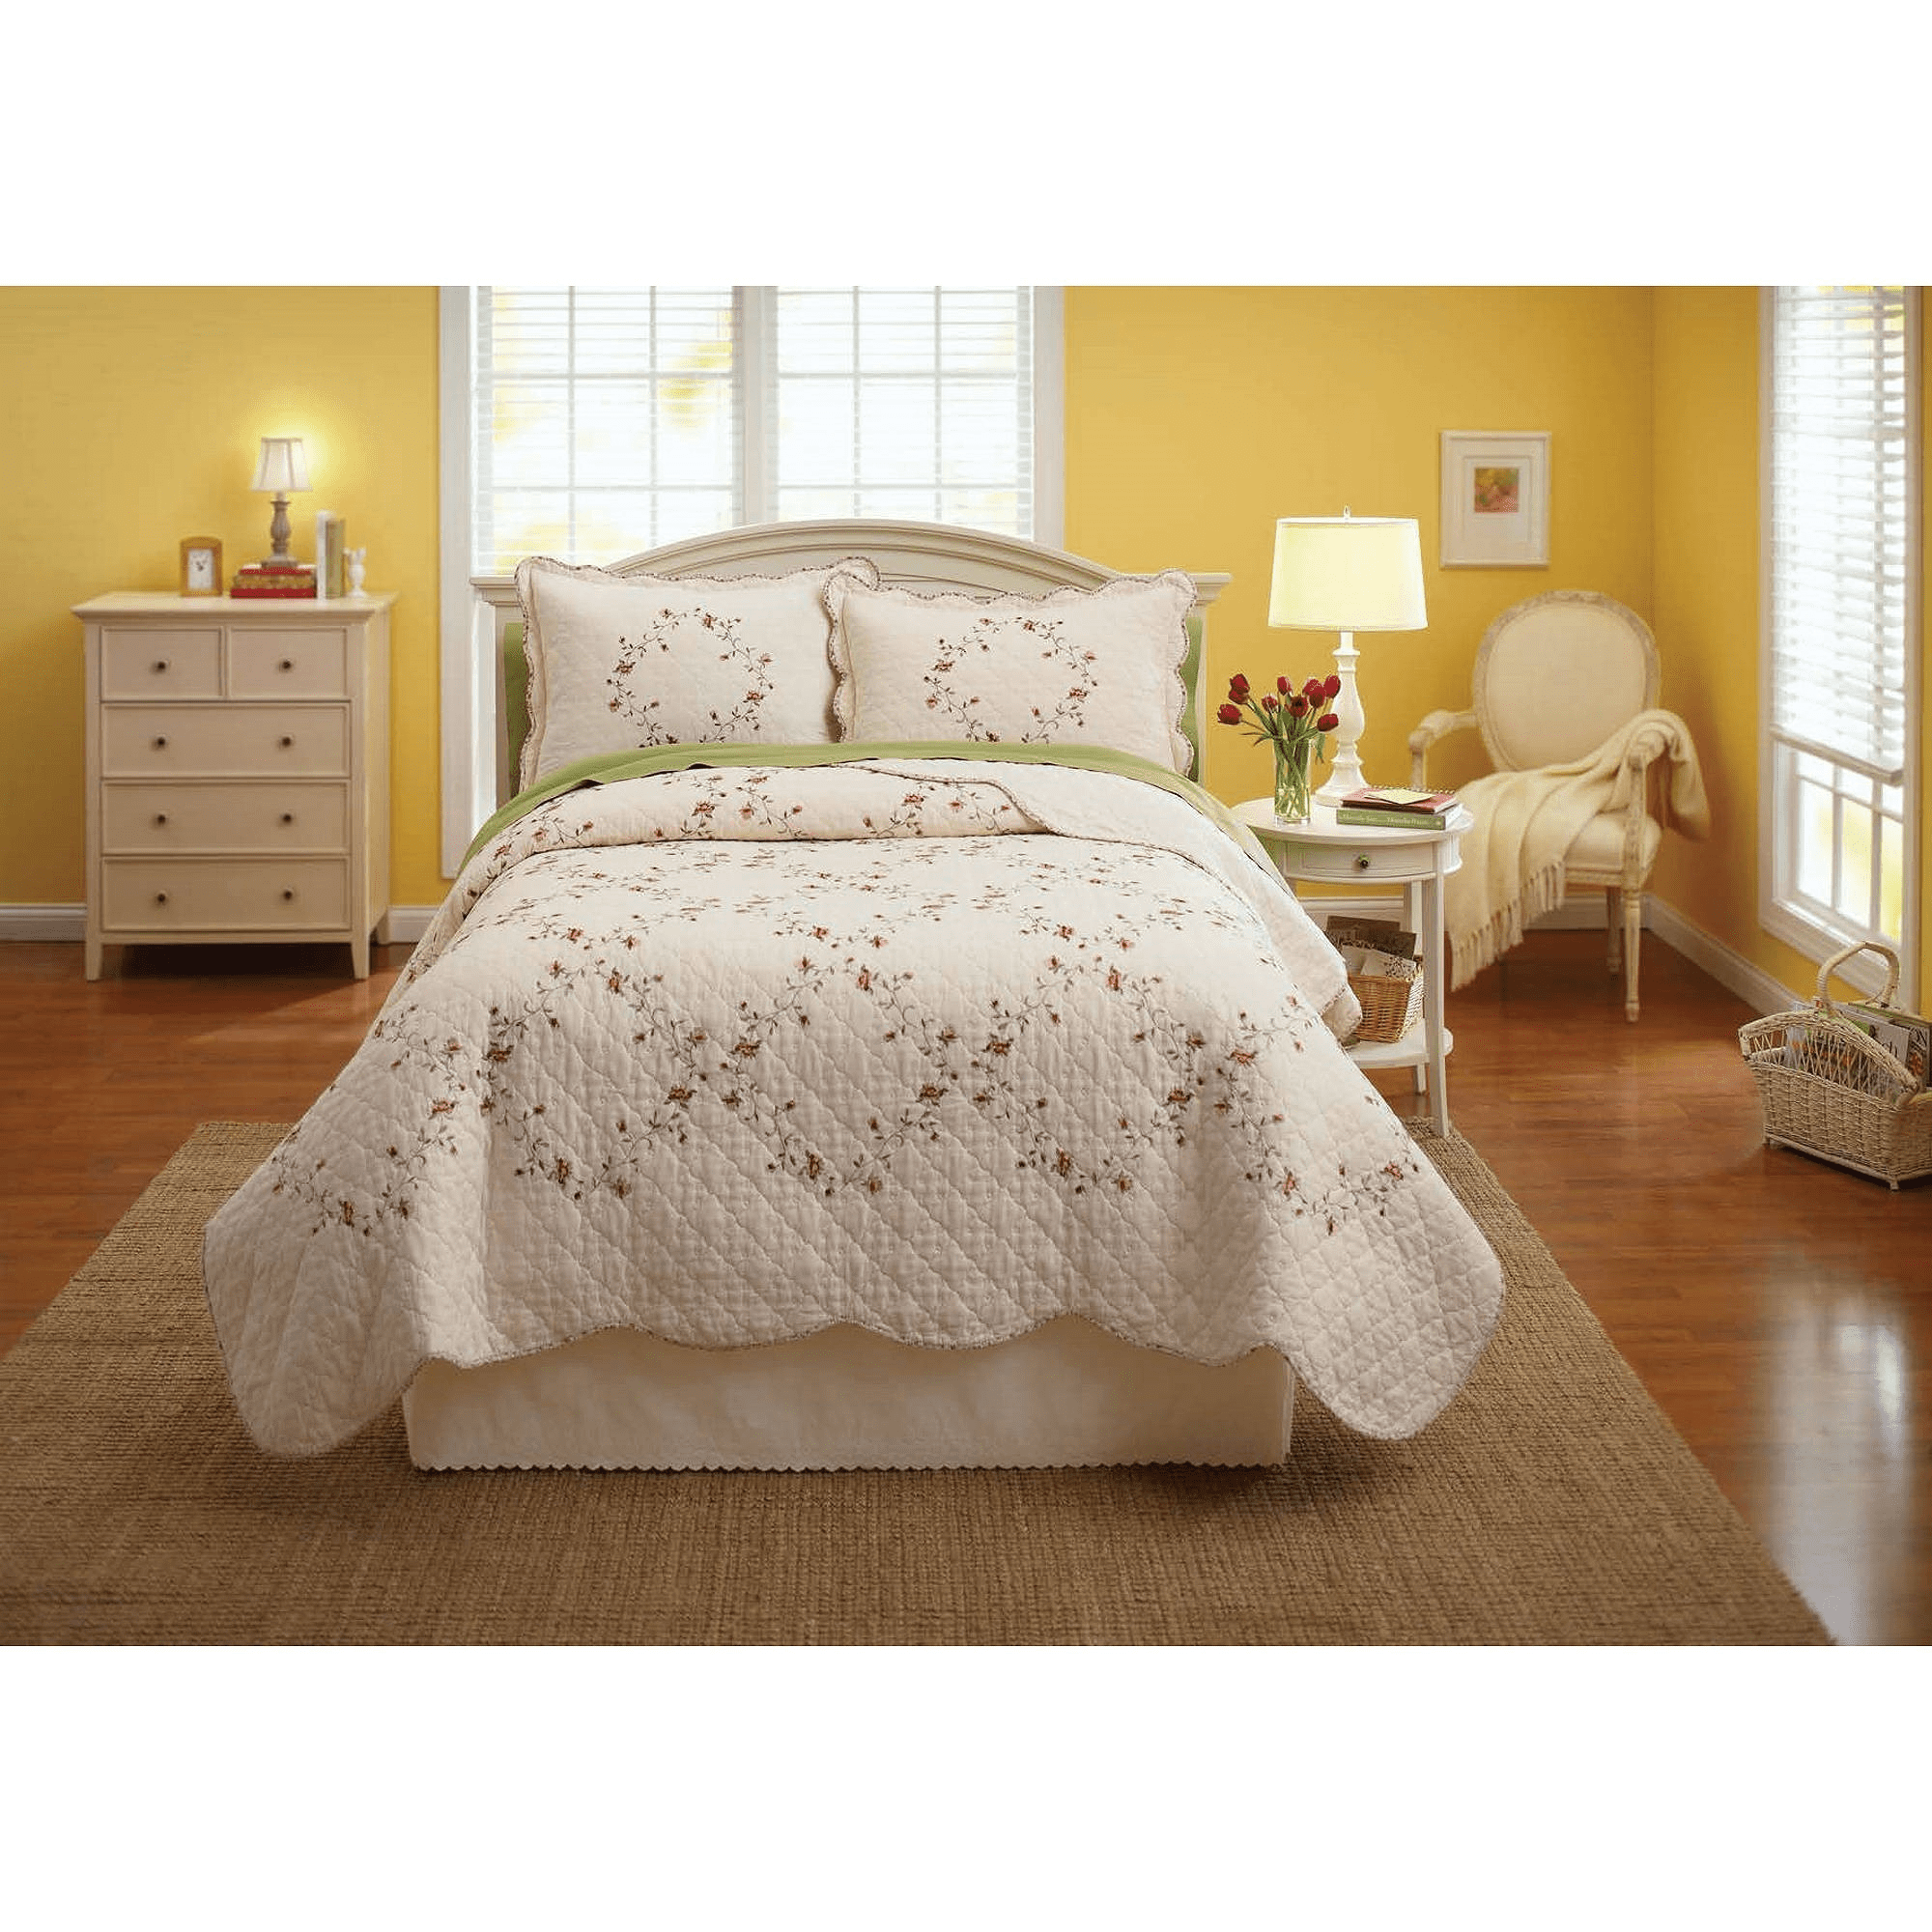 Details about   Solid Ivory Cream 6pc Twin Daybed Set Embroidery Cover Farmhouse Country Bedding 